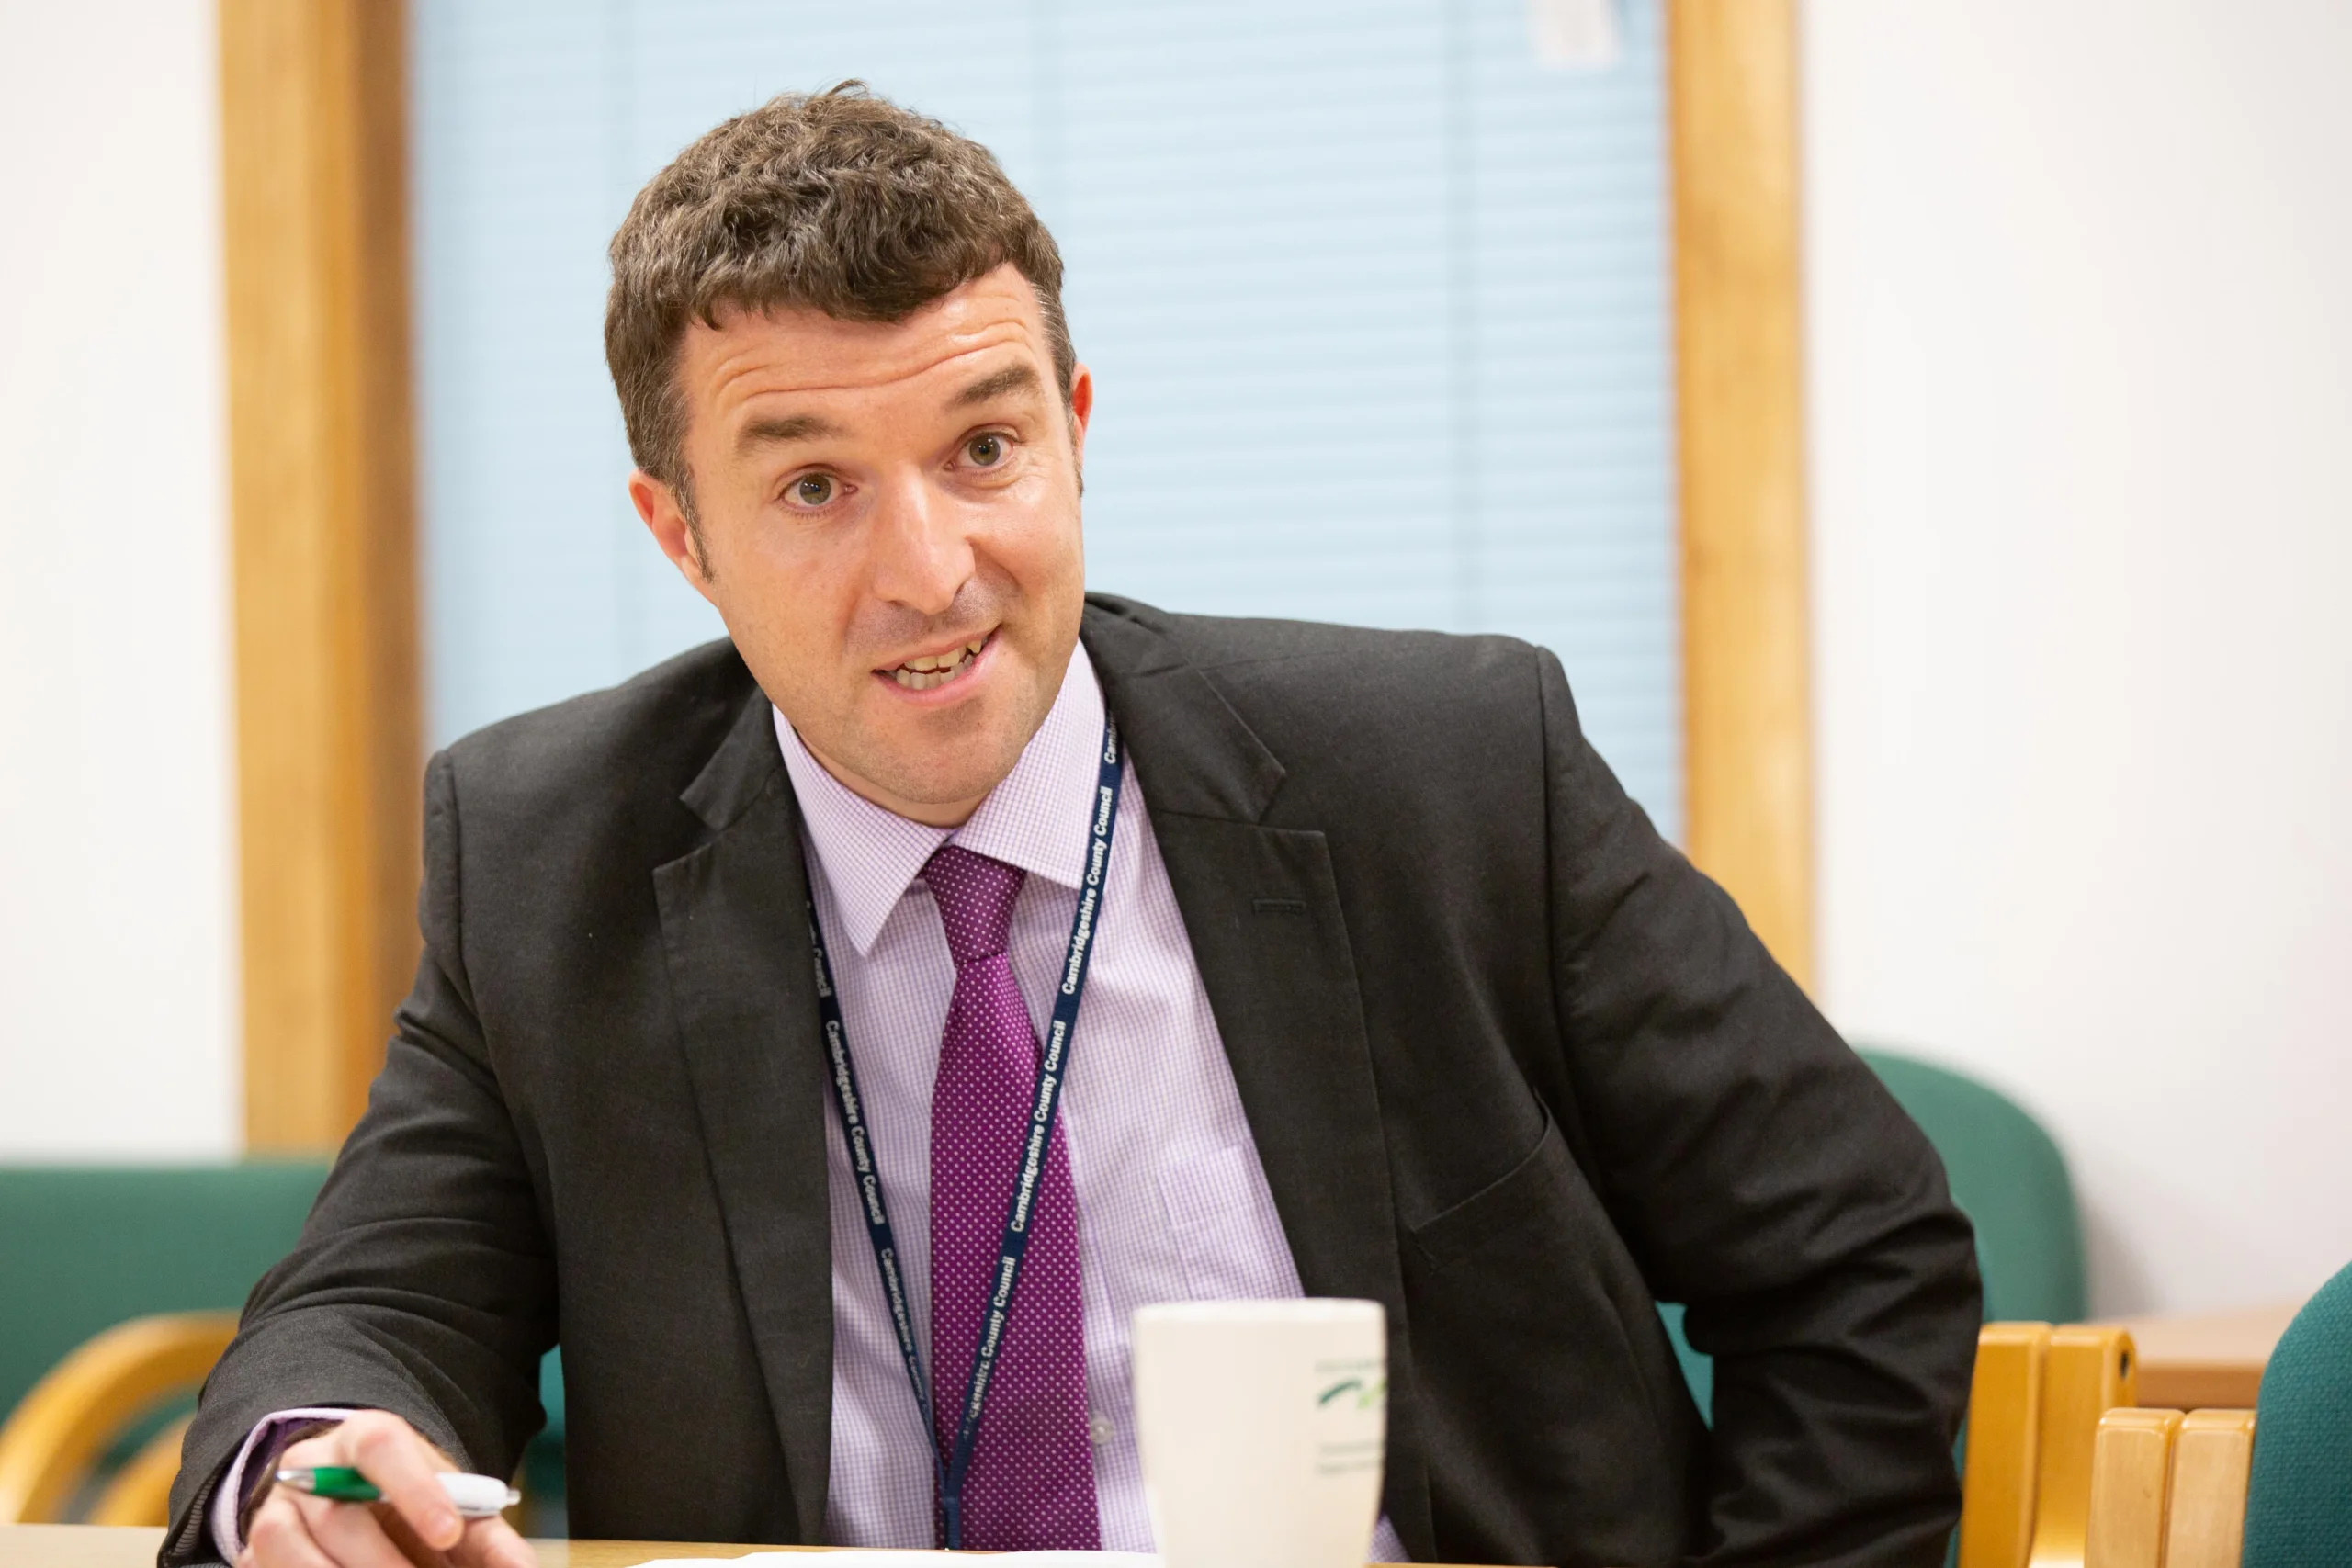 Jonathan Lewis, director of education for Cambridgeshire, and Peterborough said: “Schools are again anticipating significant disruption. Even schools which are fully open will see some disruption to the curriculum”